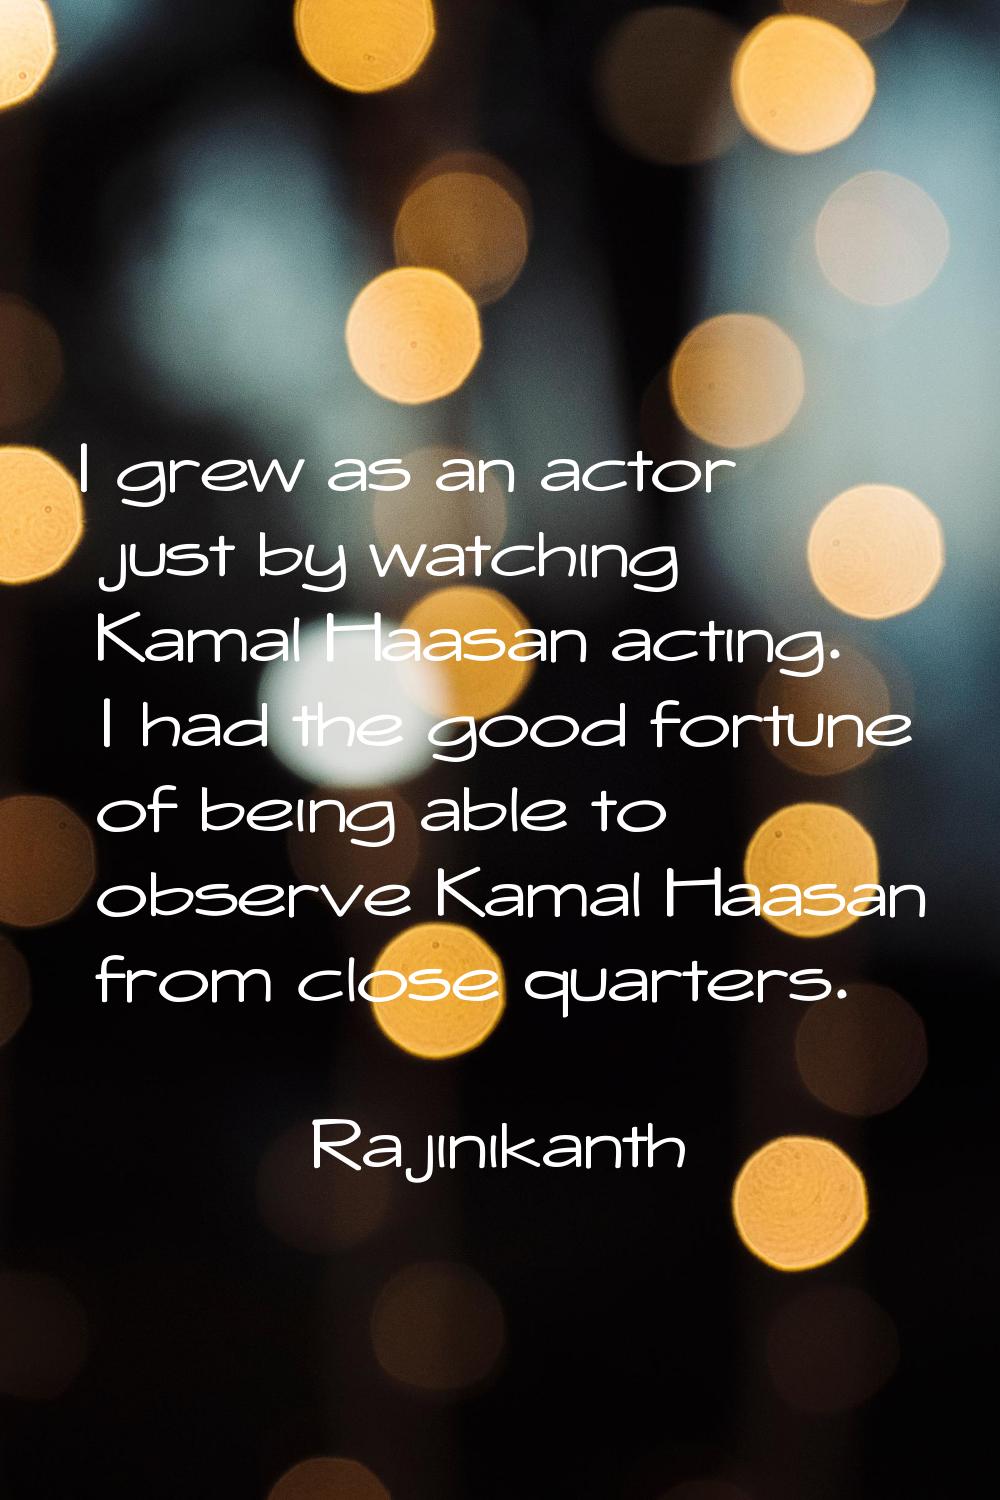 I grew as an actor just by watching Kamal Haasan acting. I had the good fortune of being able to ob